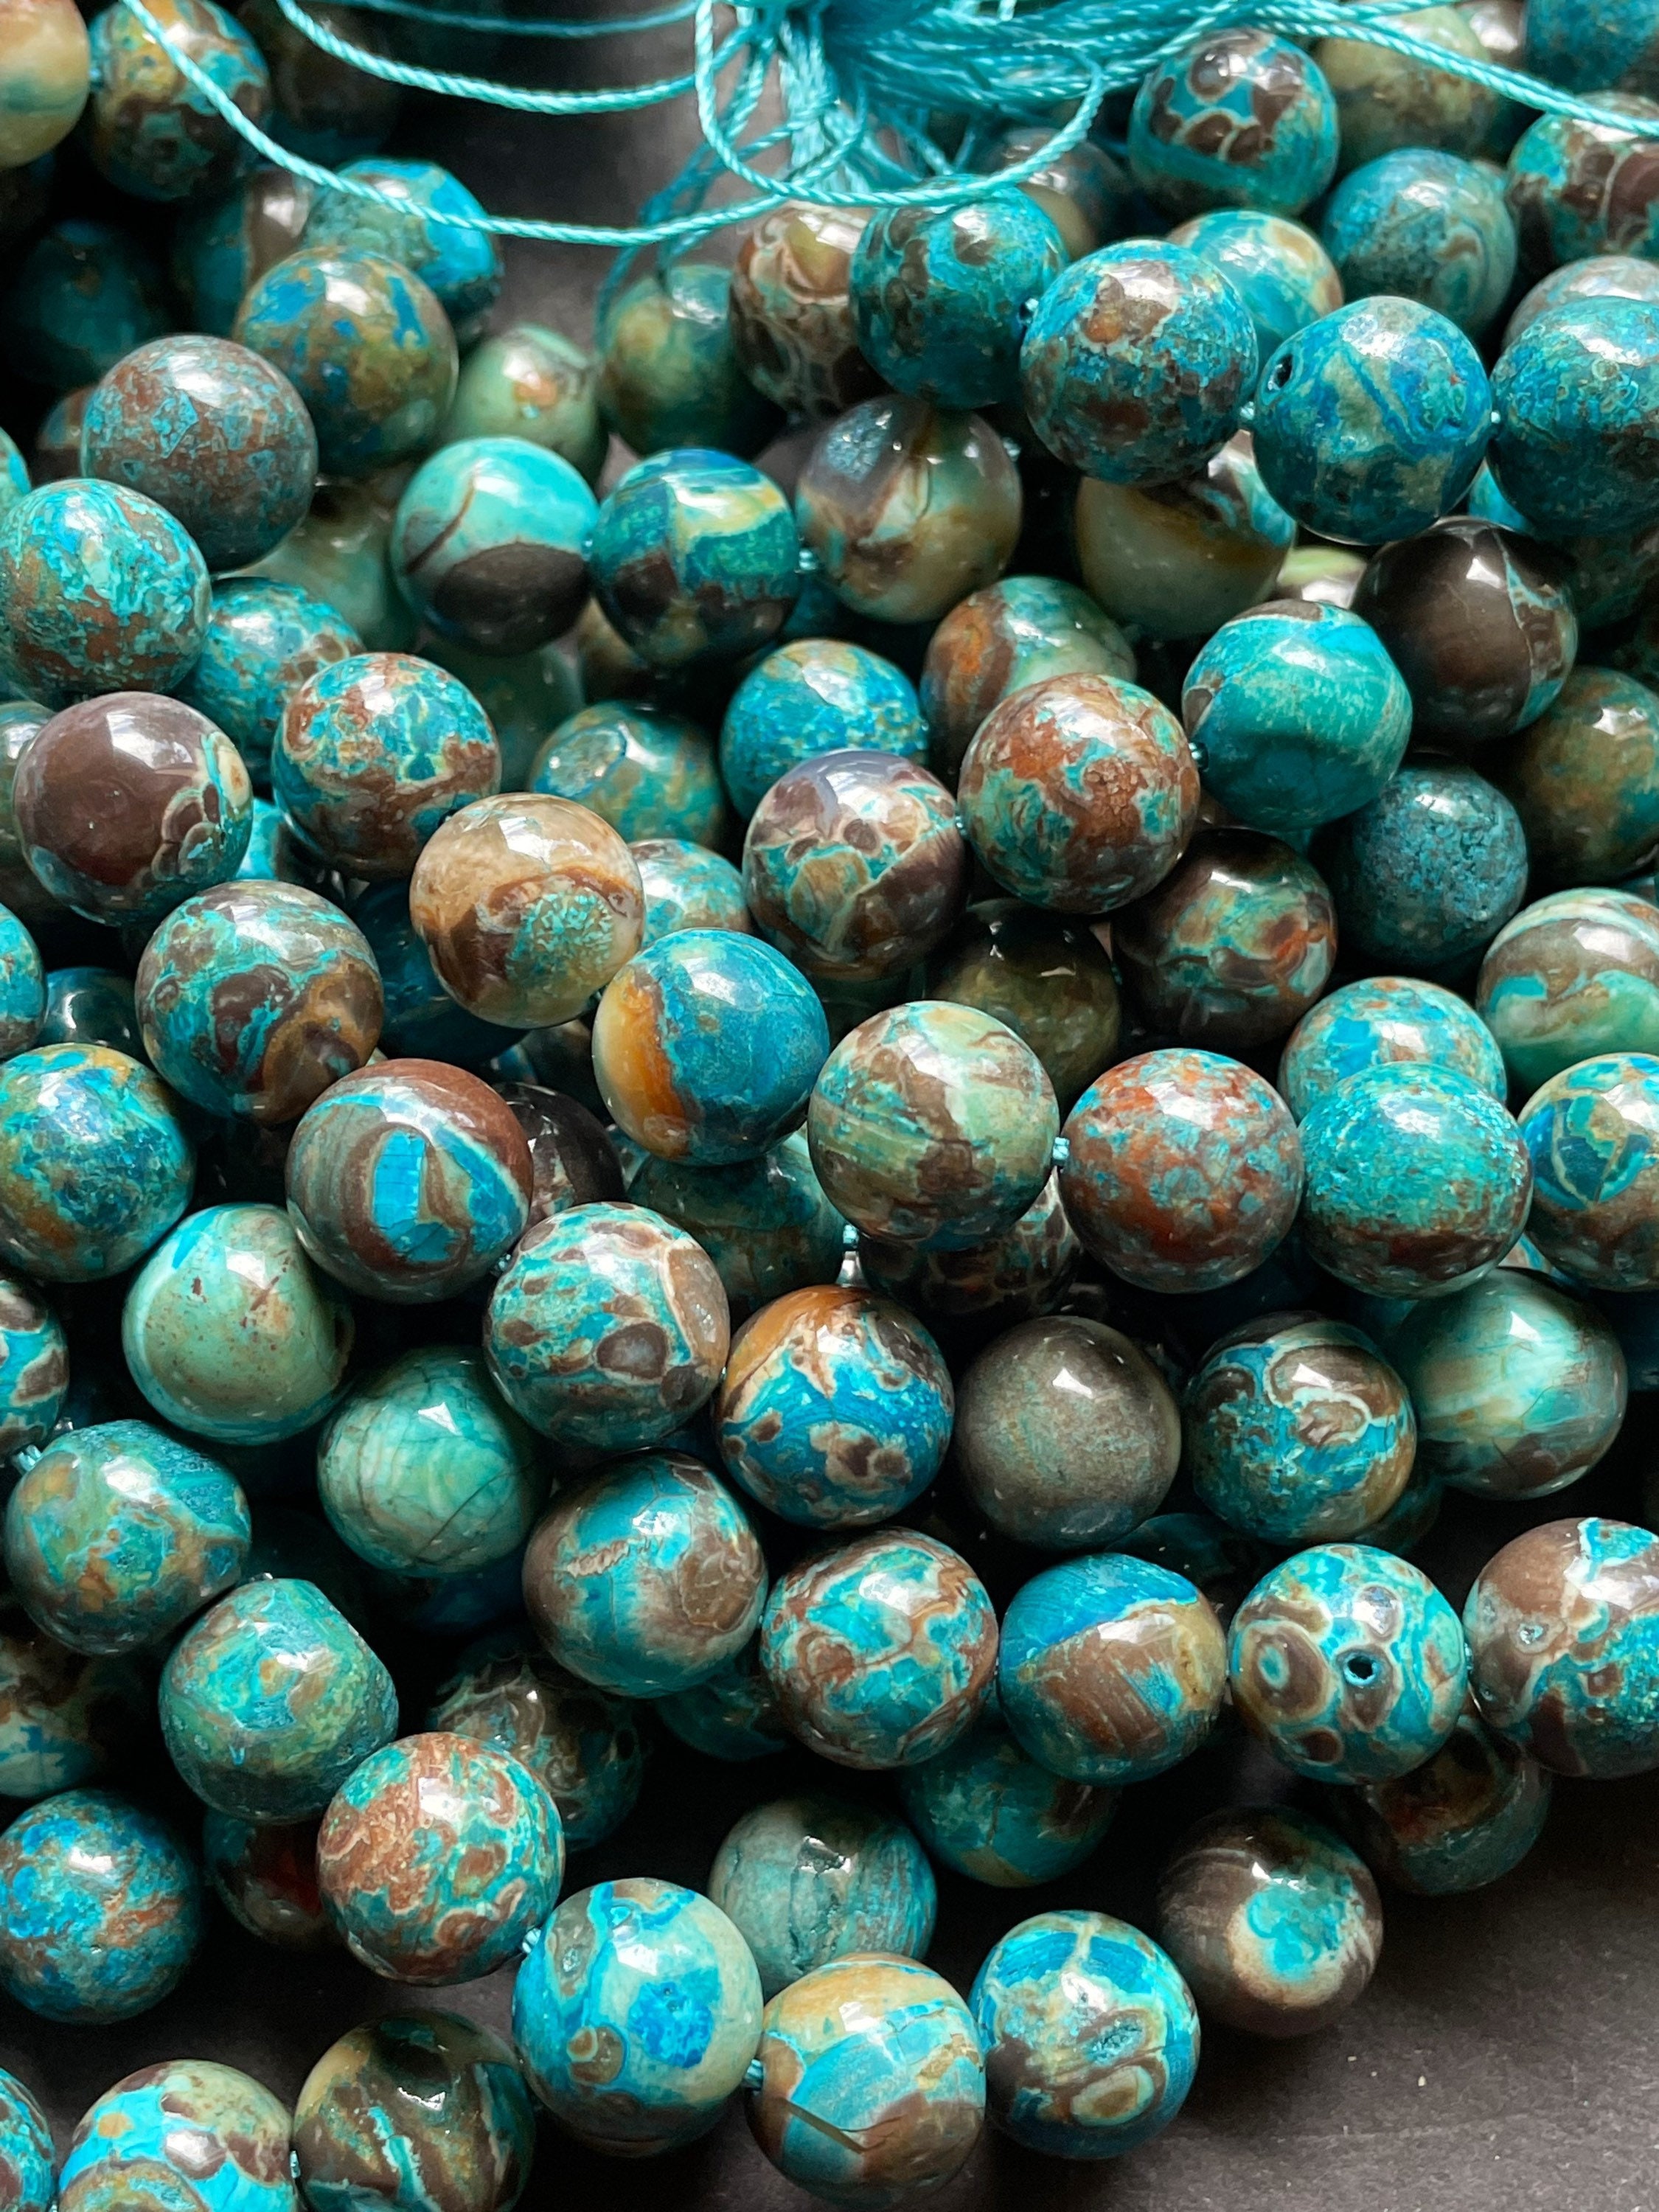 Youngbling Natural Gemstone Beads for Jewelry Making,8mm Blue Imperial  Jasper Polished Round Smooth Stone Boho Beads,Genuine Real Stone Beads for